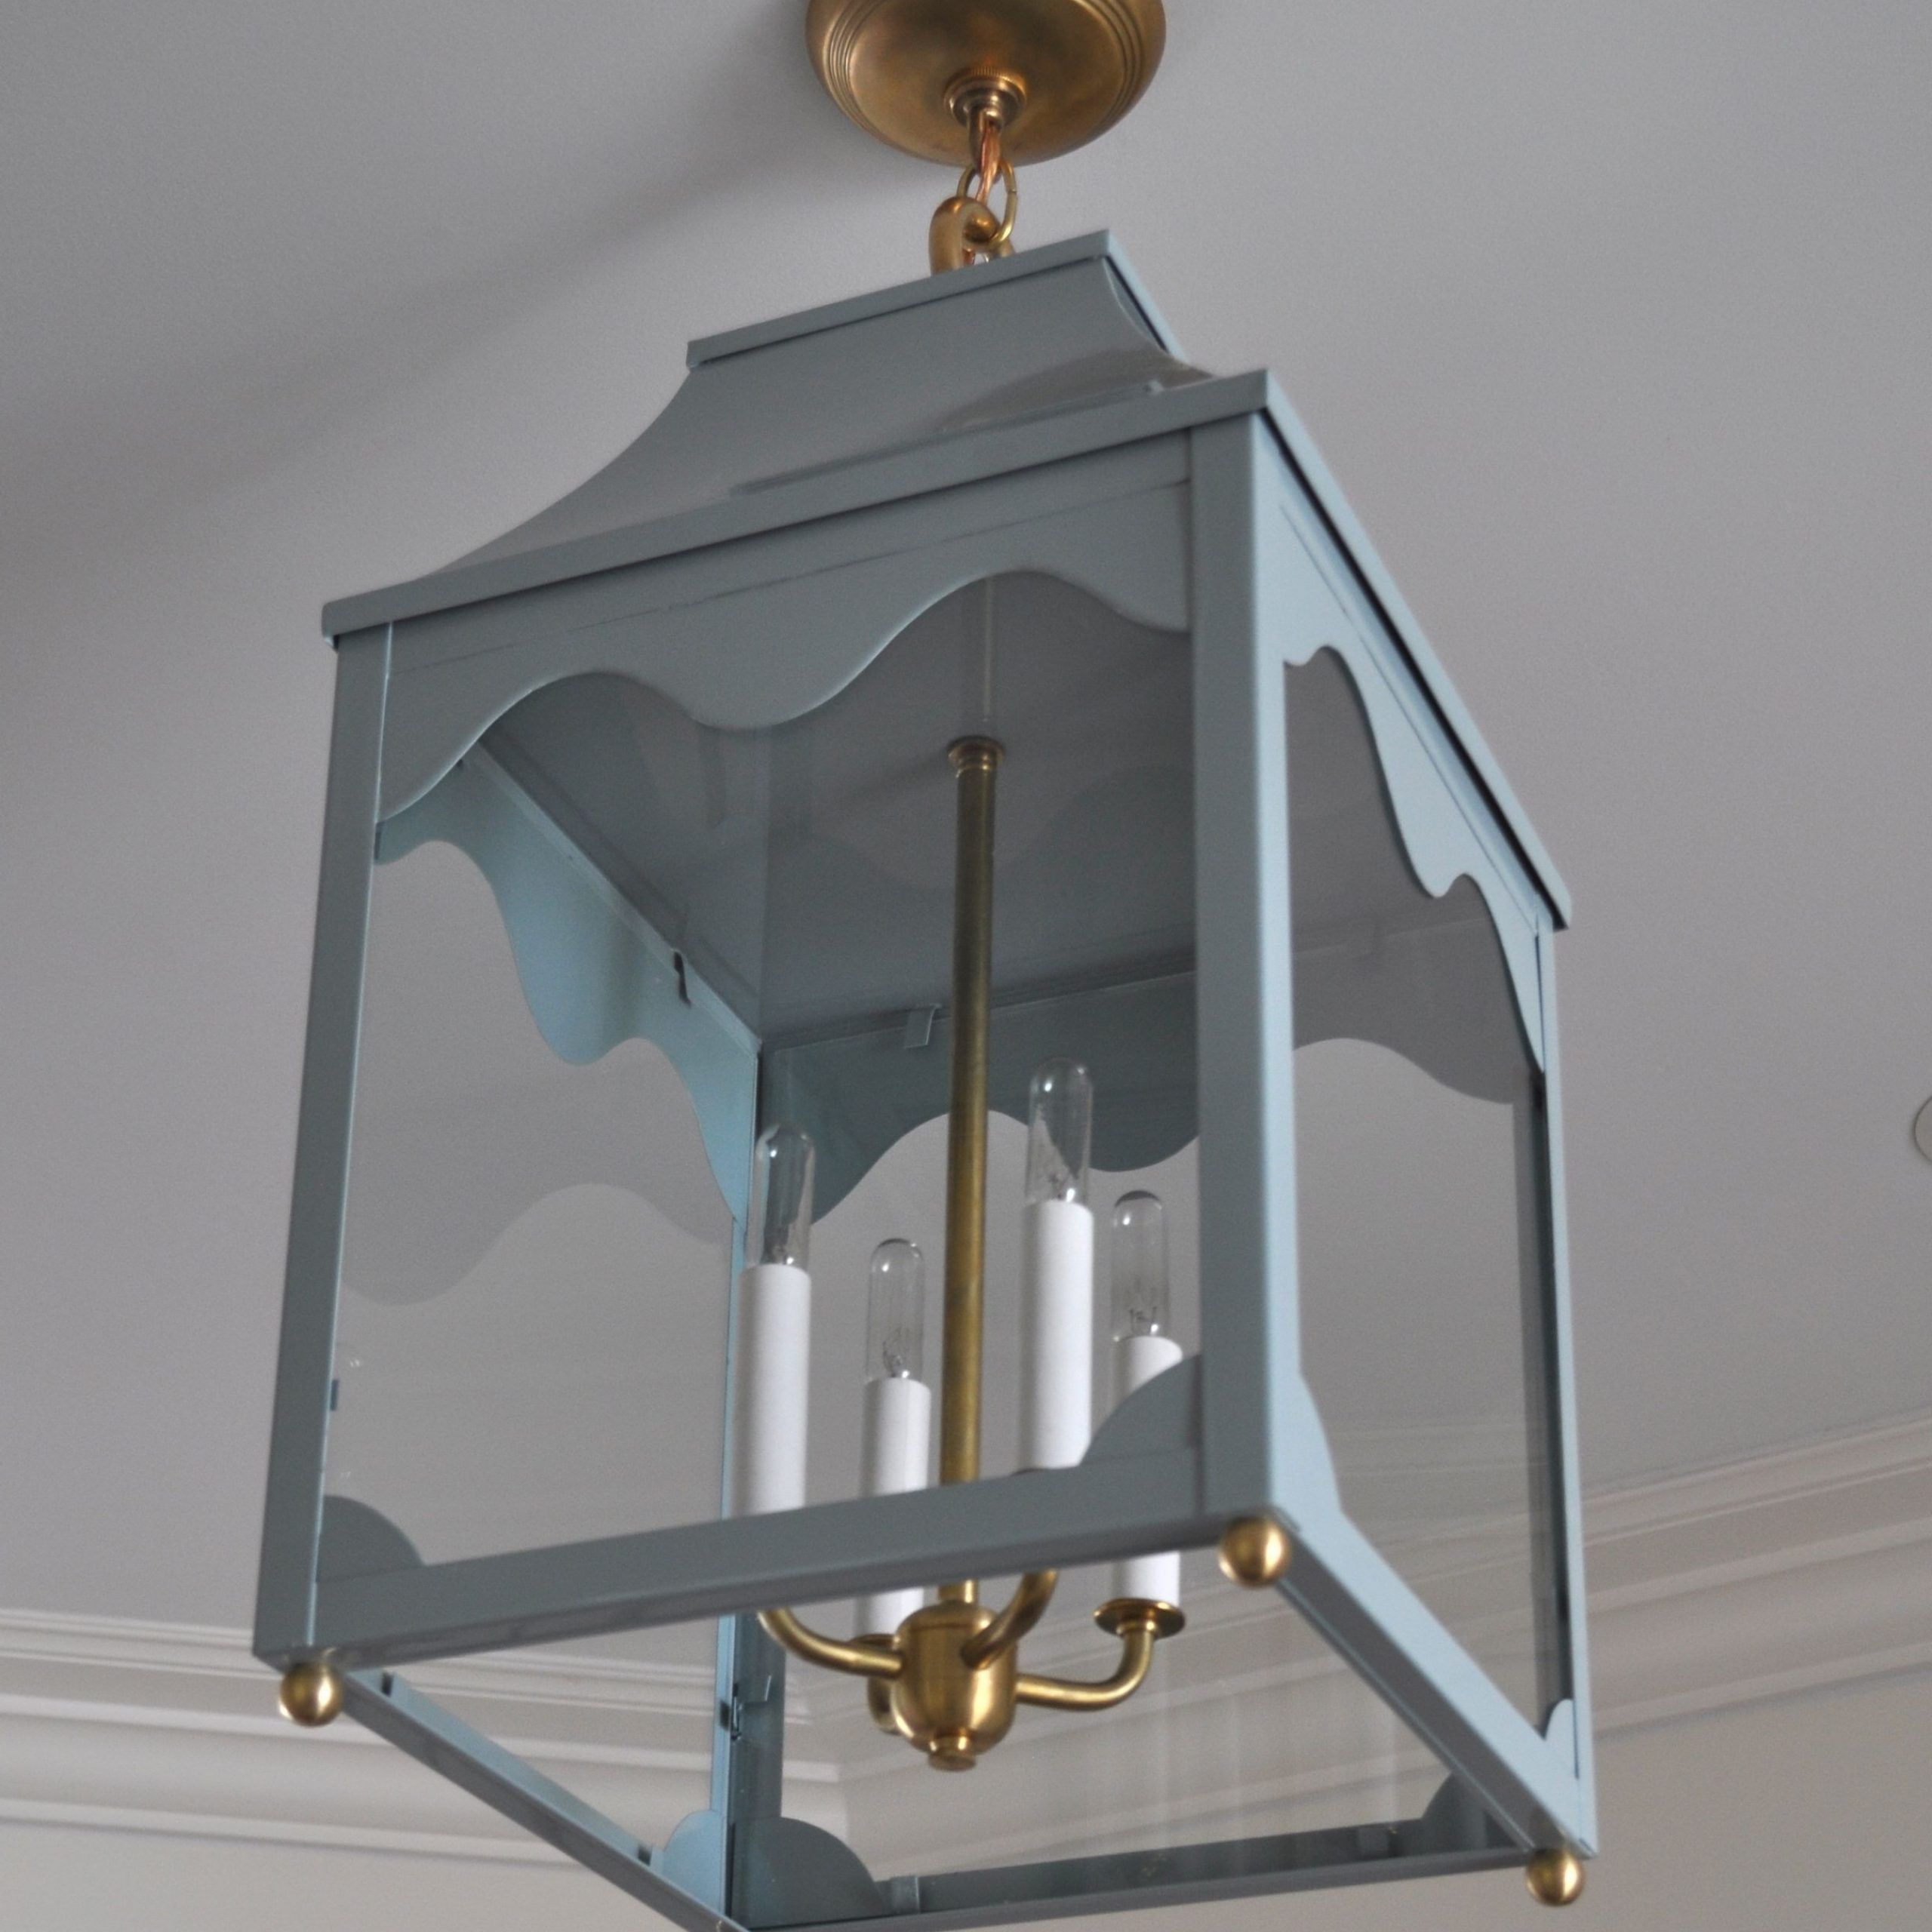 Blue Lantern Chandeliers Pertaining To Well Known Hobe Sound Decorative Lantern (View 2 of 15)